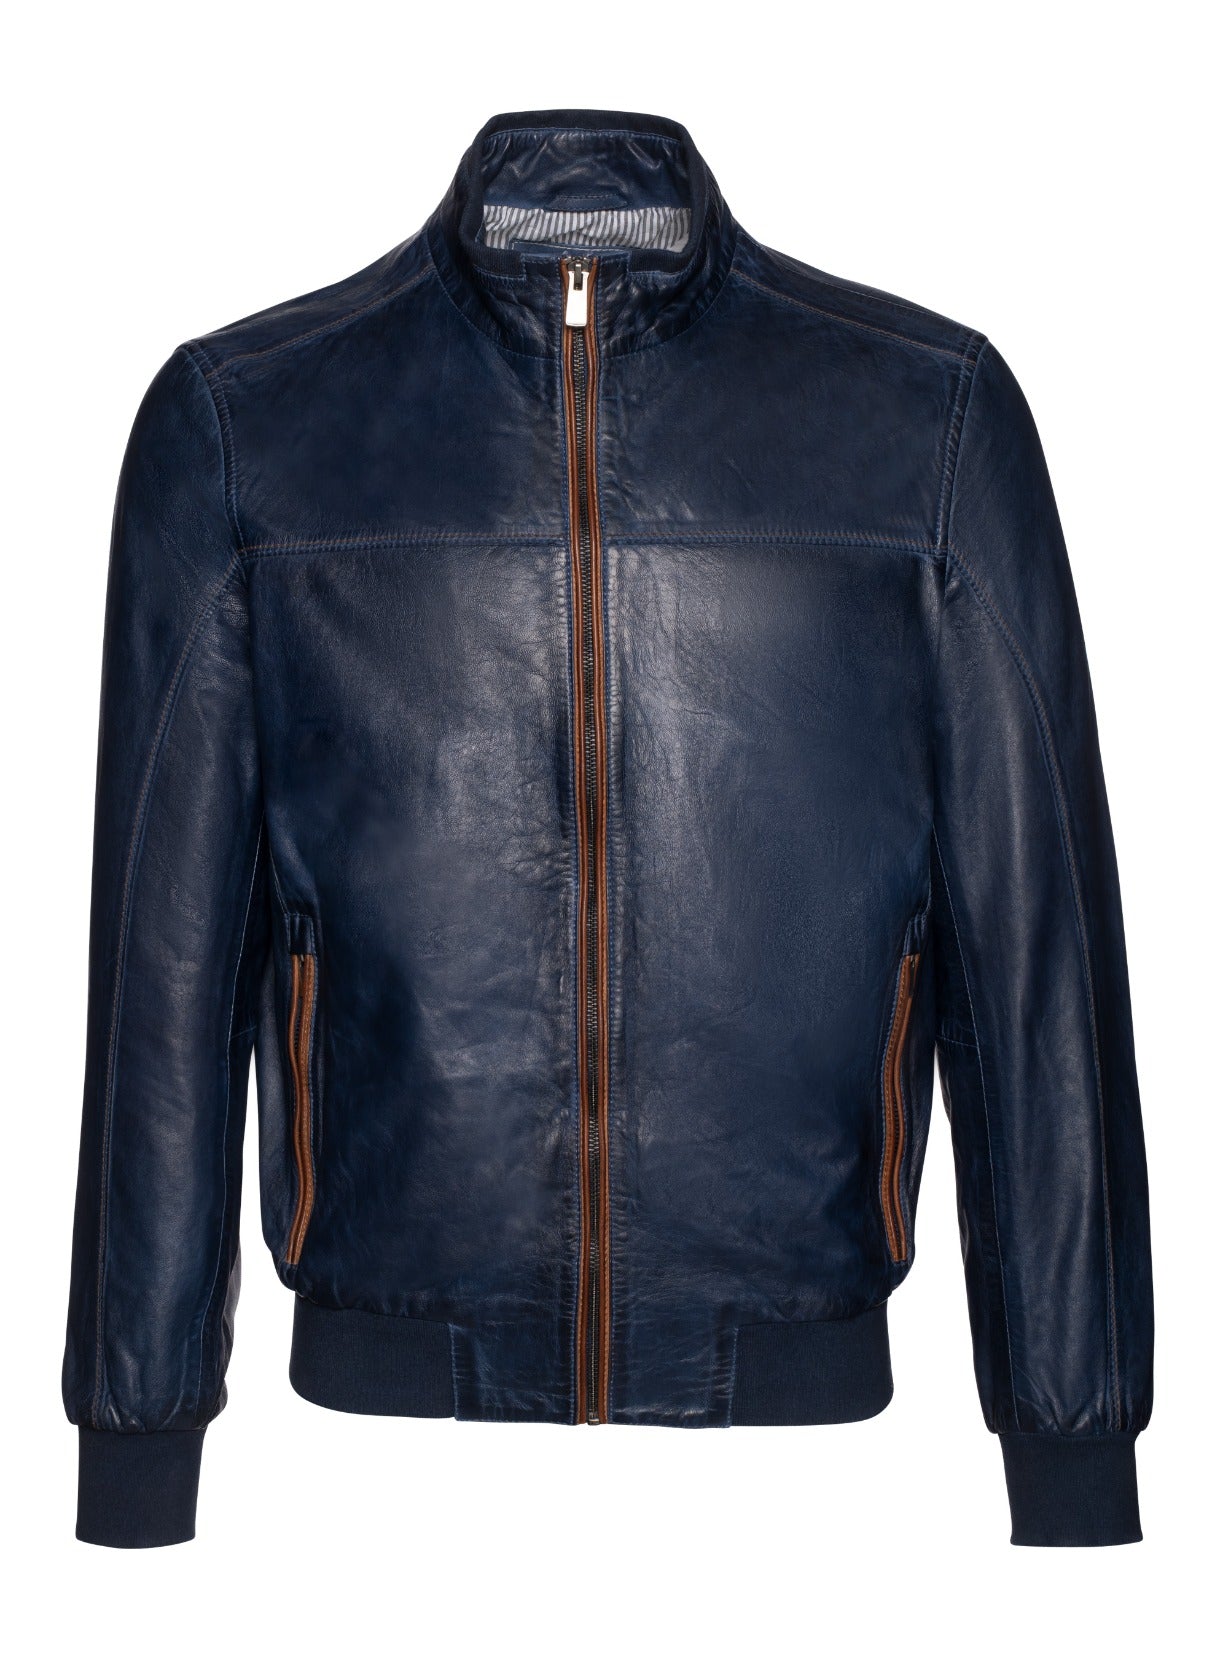 The Rene Leather Jacket is a timeless piece that every man needs in their wardrobe. Its classic design and lightweight construction make it perfect for any occasion. With its supple hand feel, this jacket exudes sophistication and style, making it a wardrobe essential for any modern man.